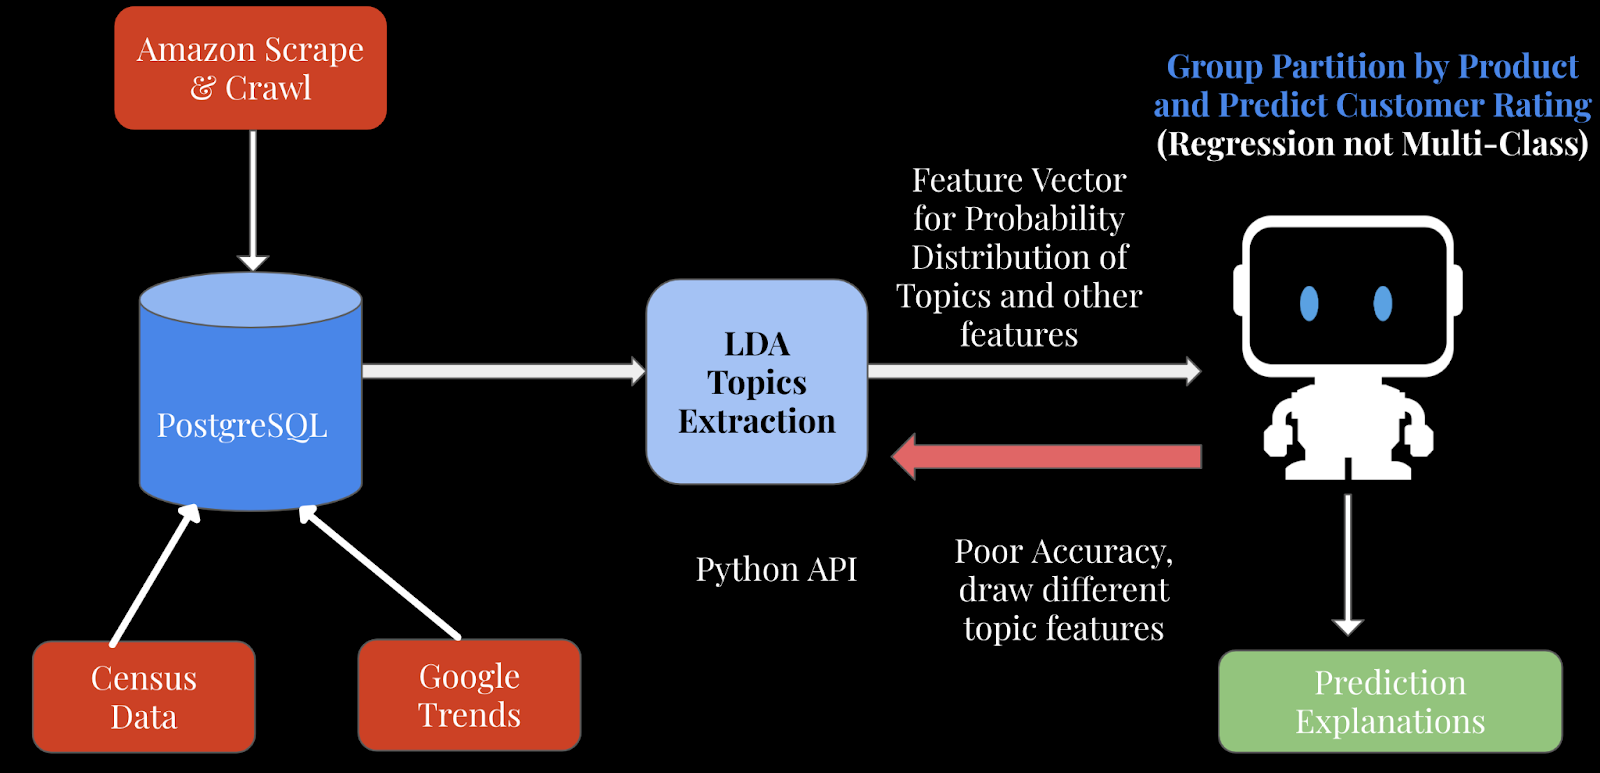 Overall approach for the supervised topic models